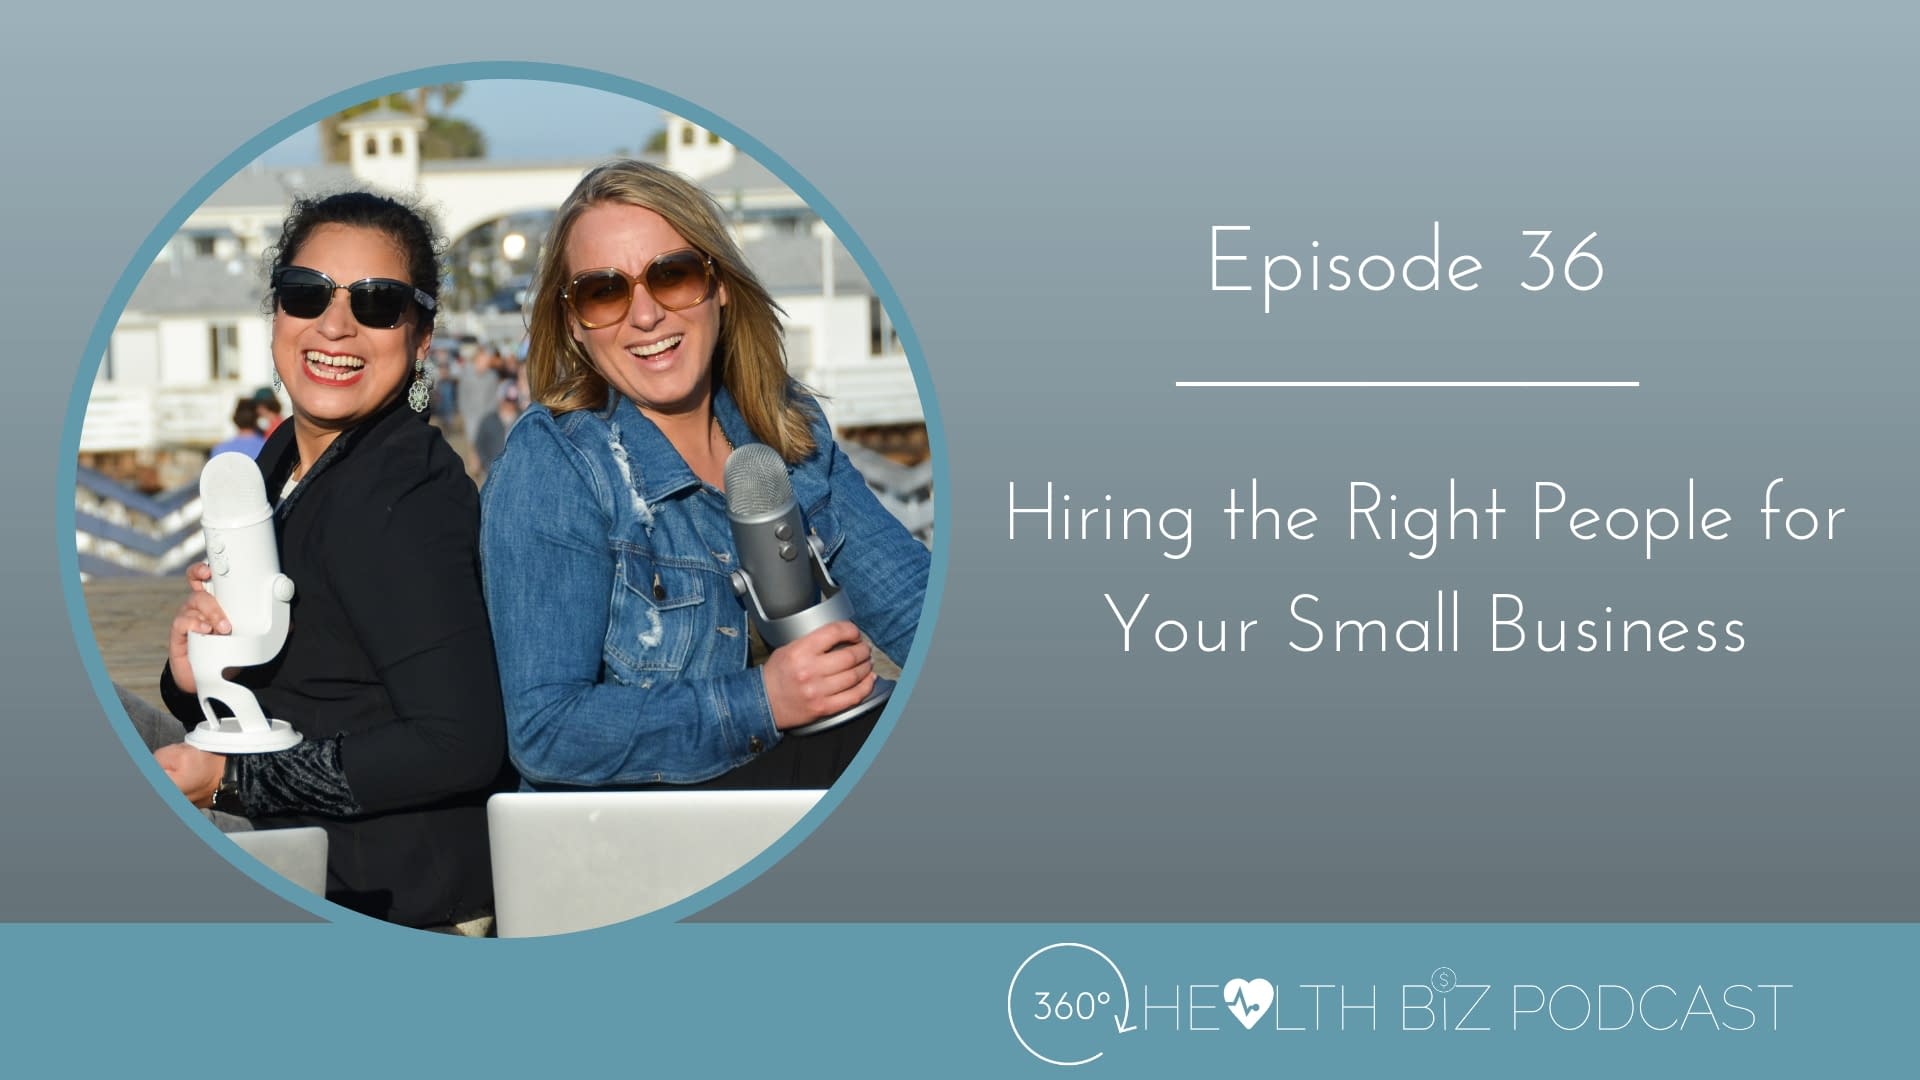 Hiring the Right People for Your Small Business